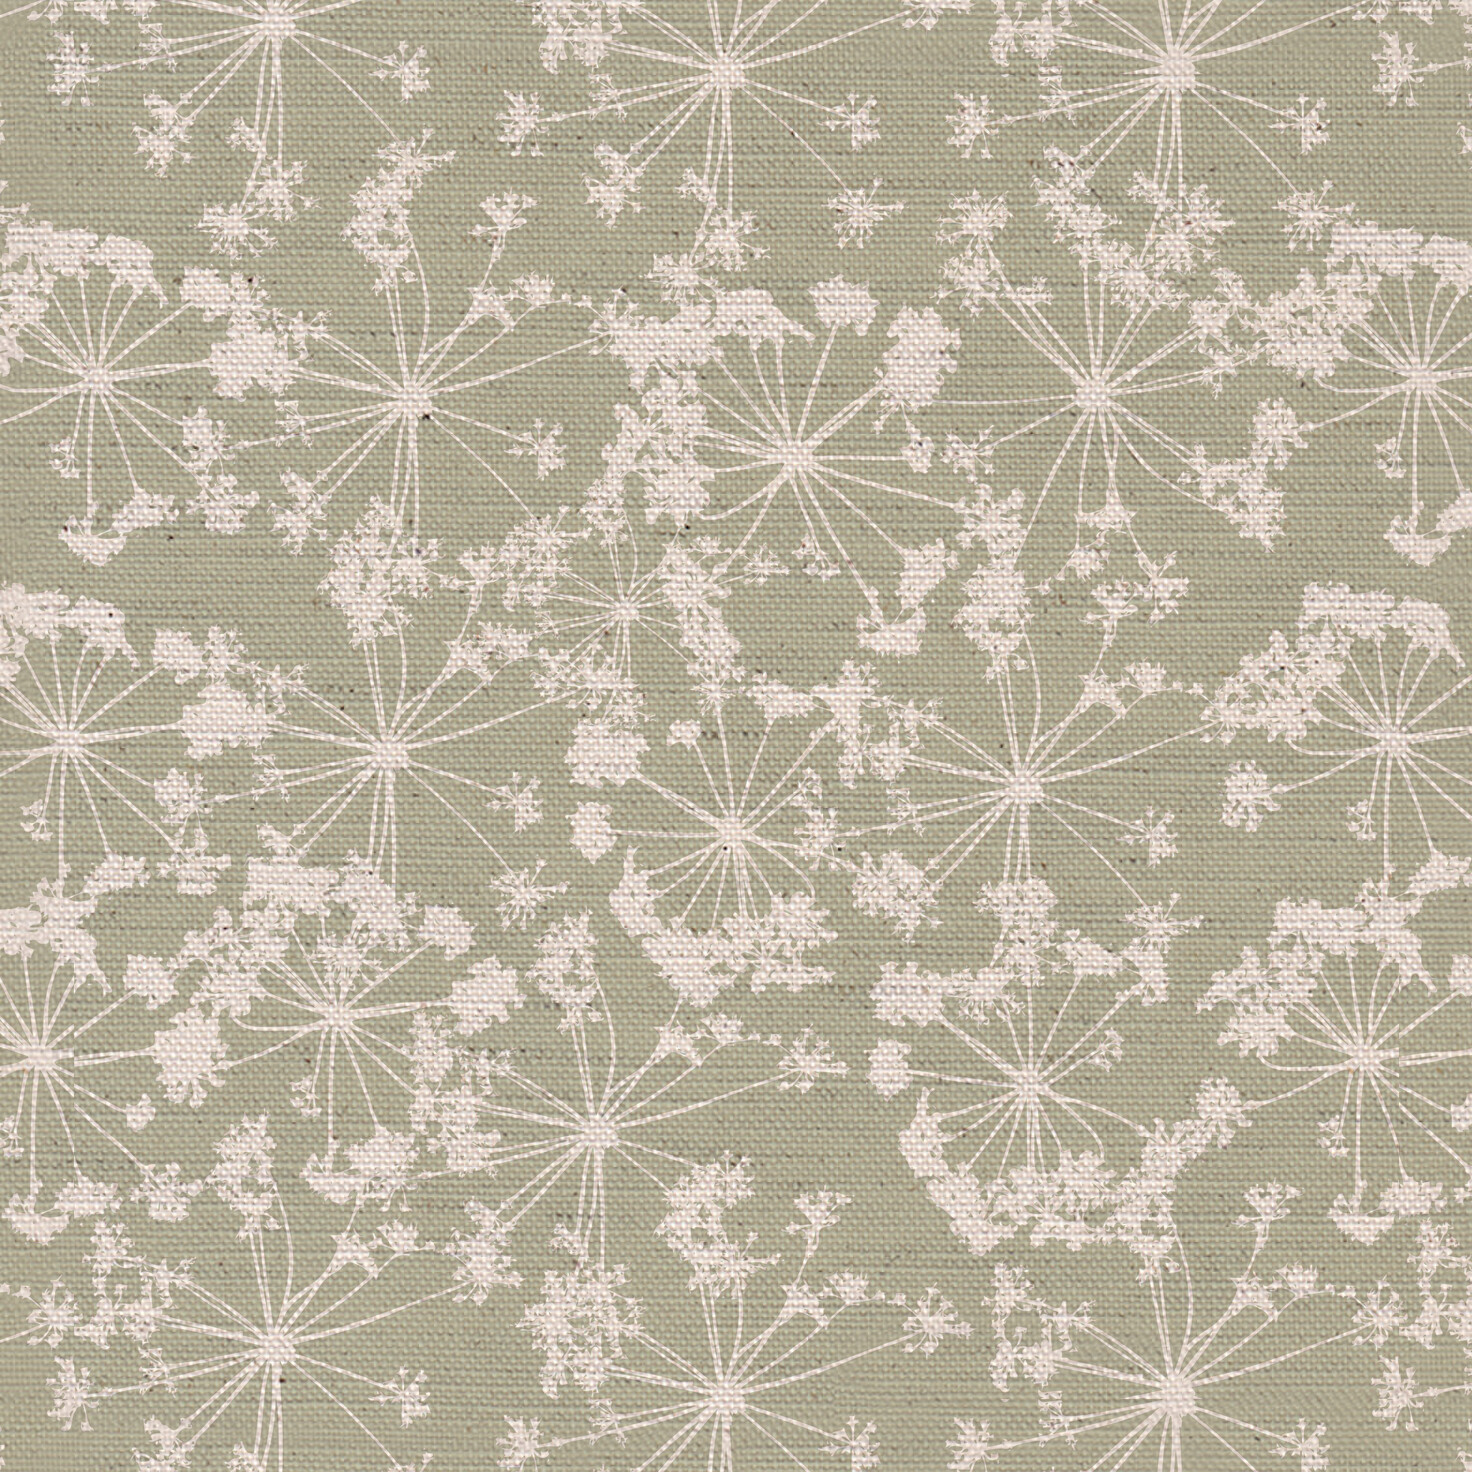 Country Lane Flower Tops Fabric in Pastel Green on a Natural Background